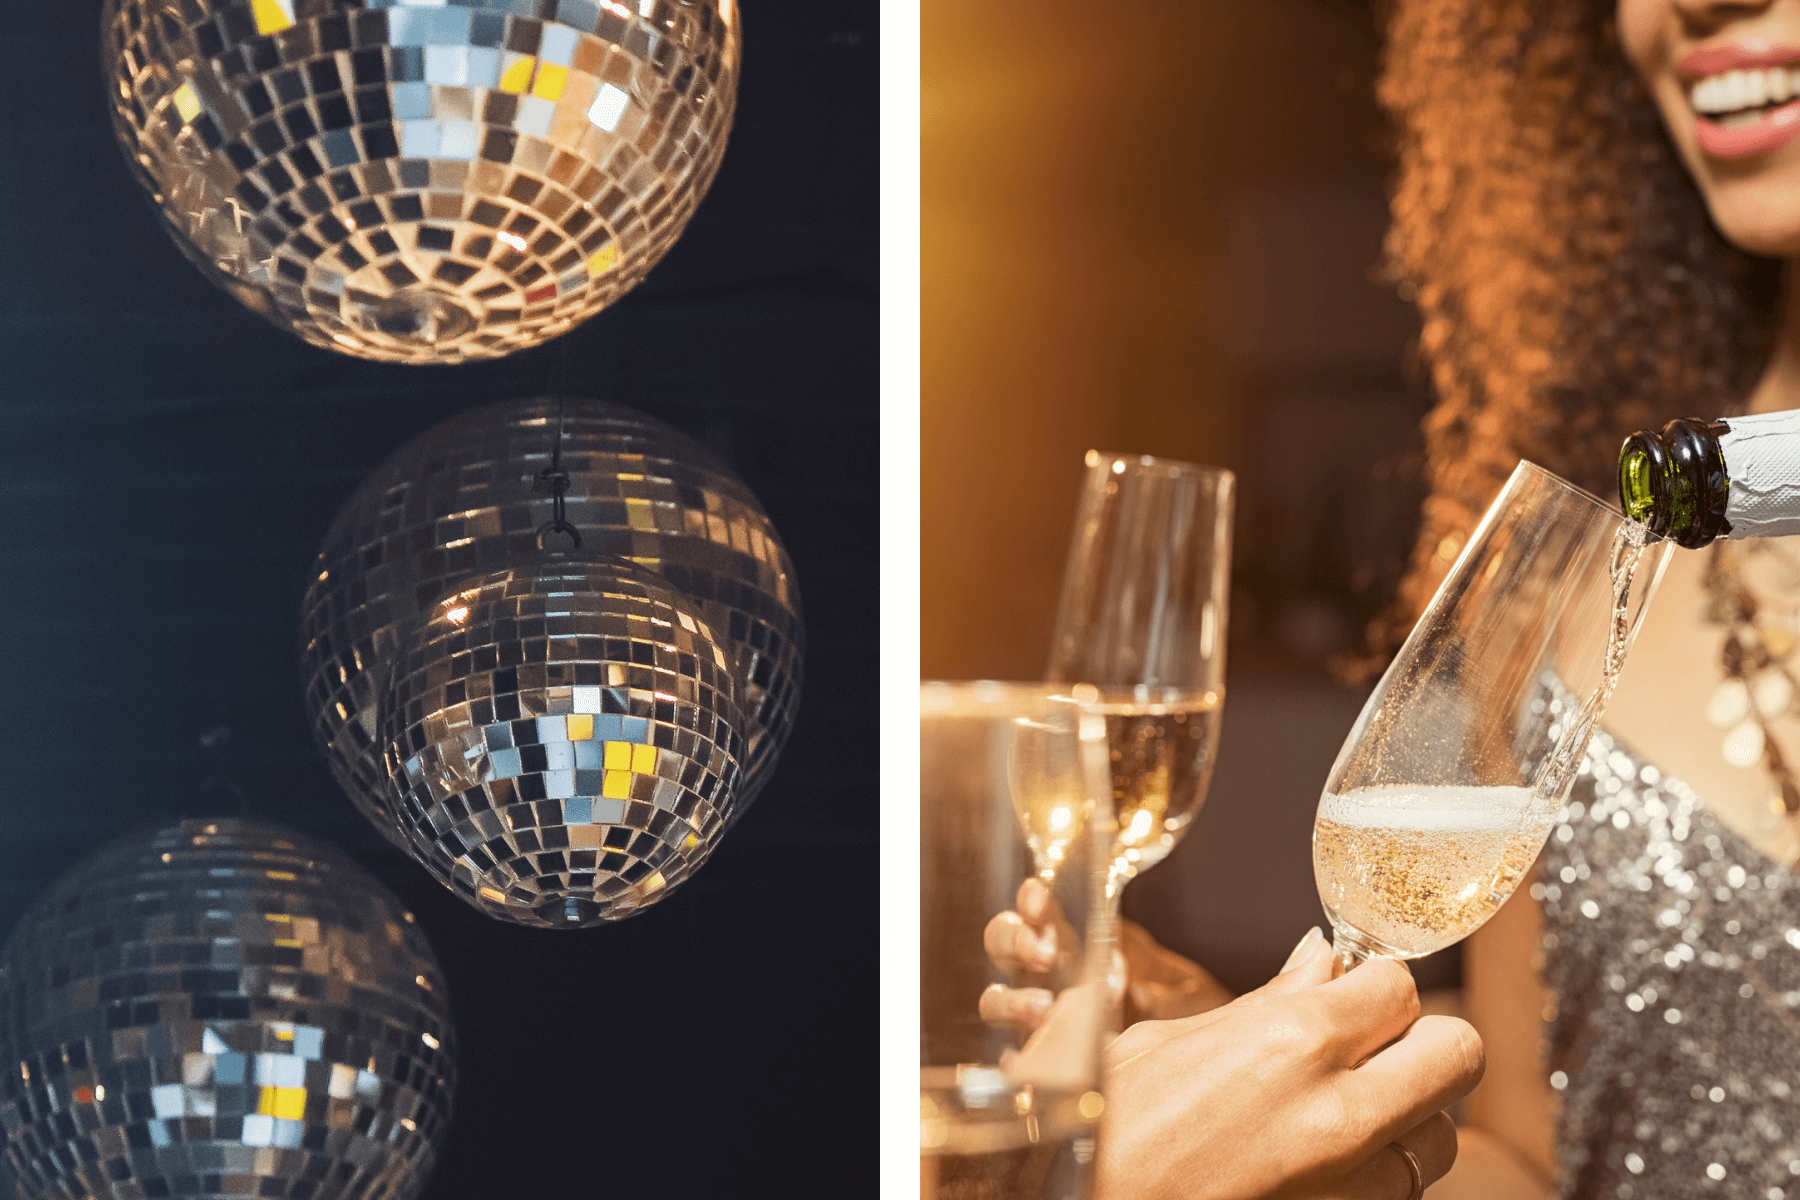 Left: Four disco balls against a dark background; right: A woman pours Champagne into a glass for an off-screen friend.